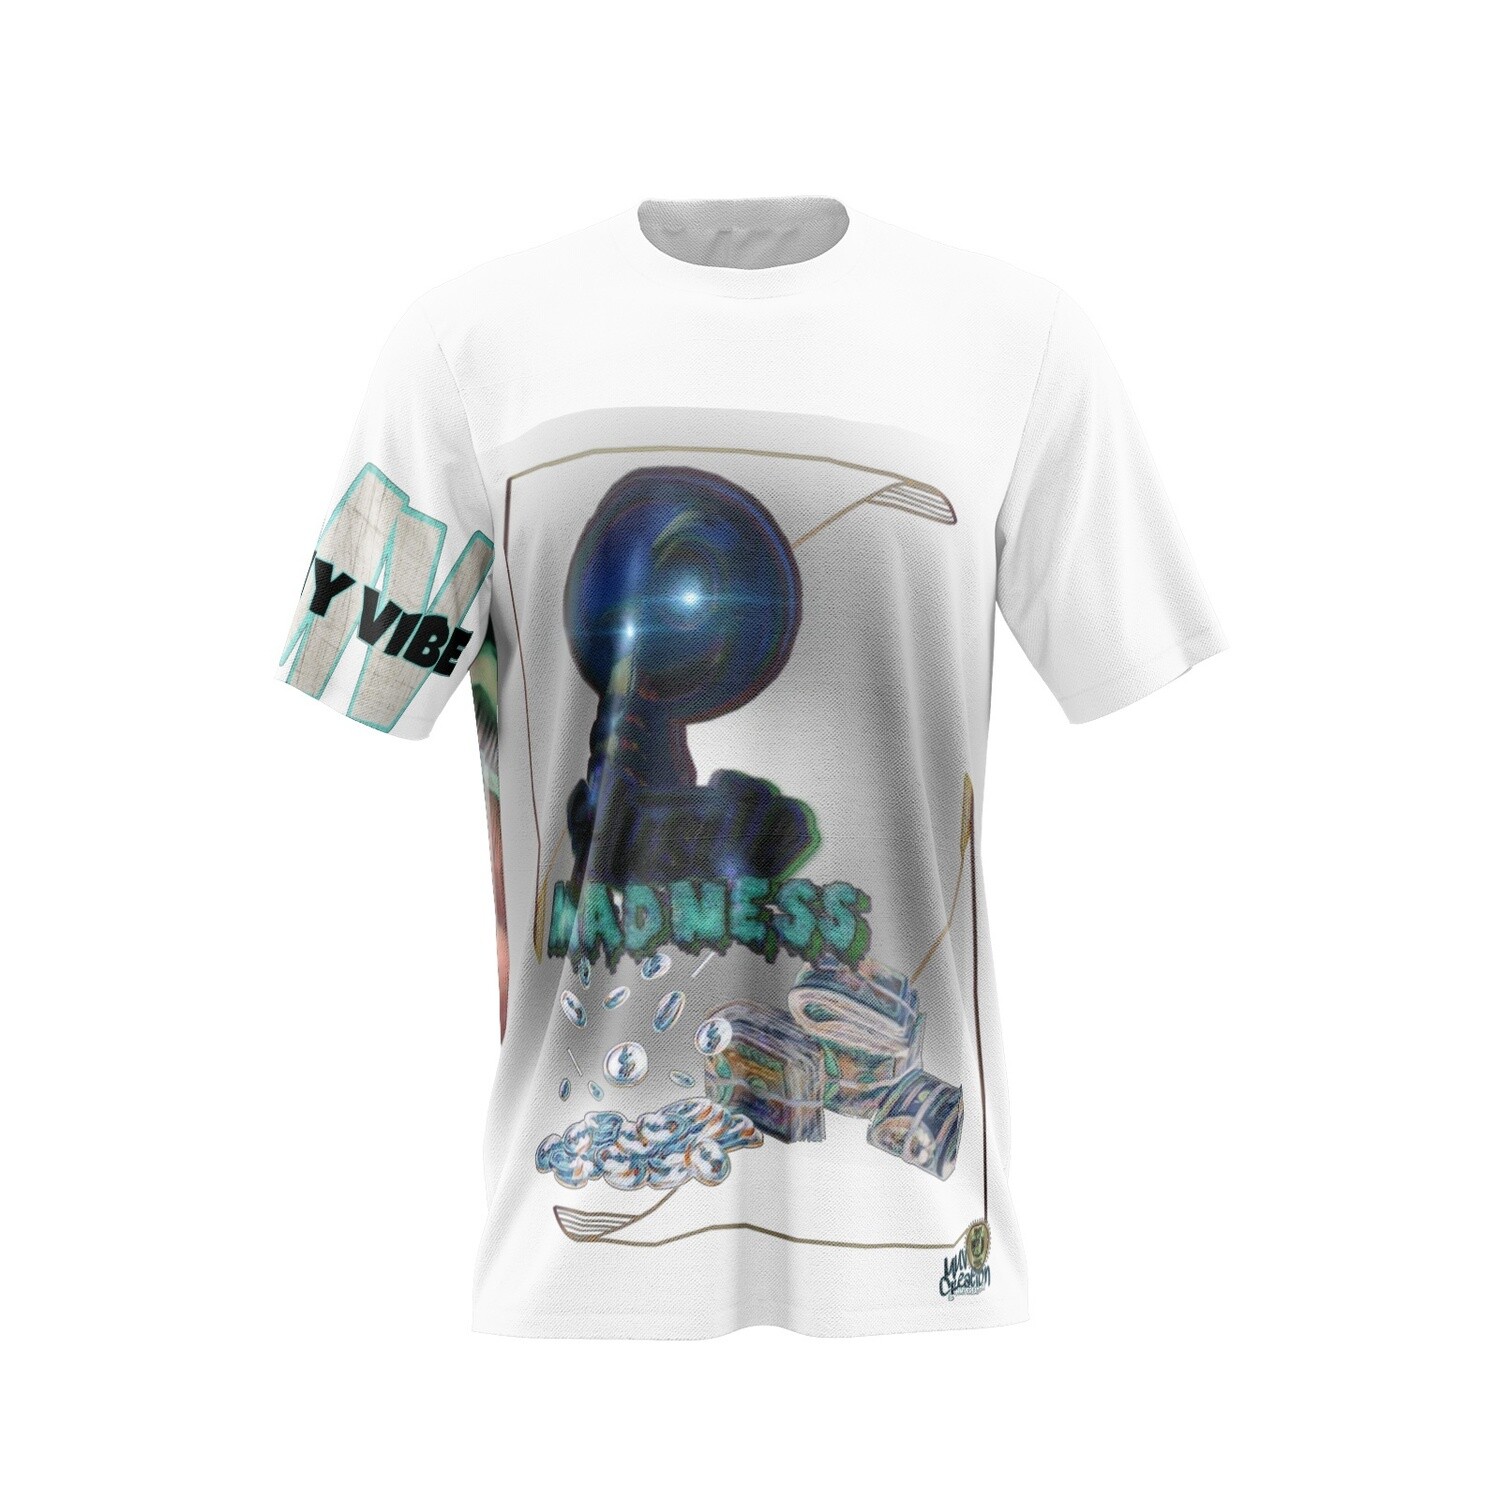 MMV - Hustle Madness - All-Over Print T